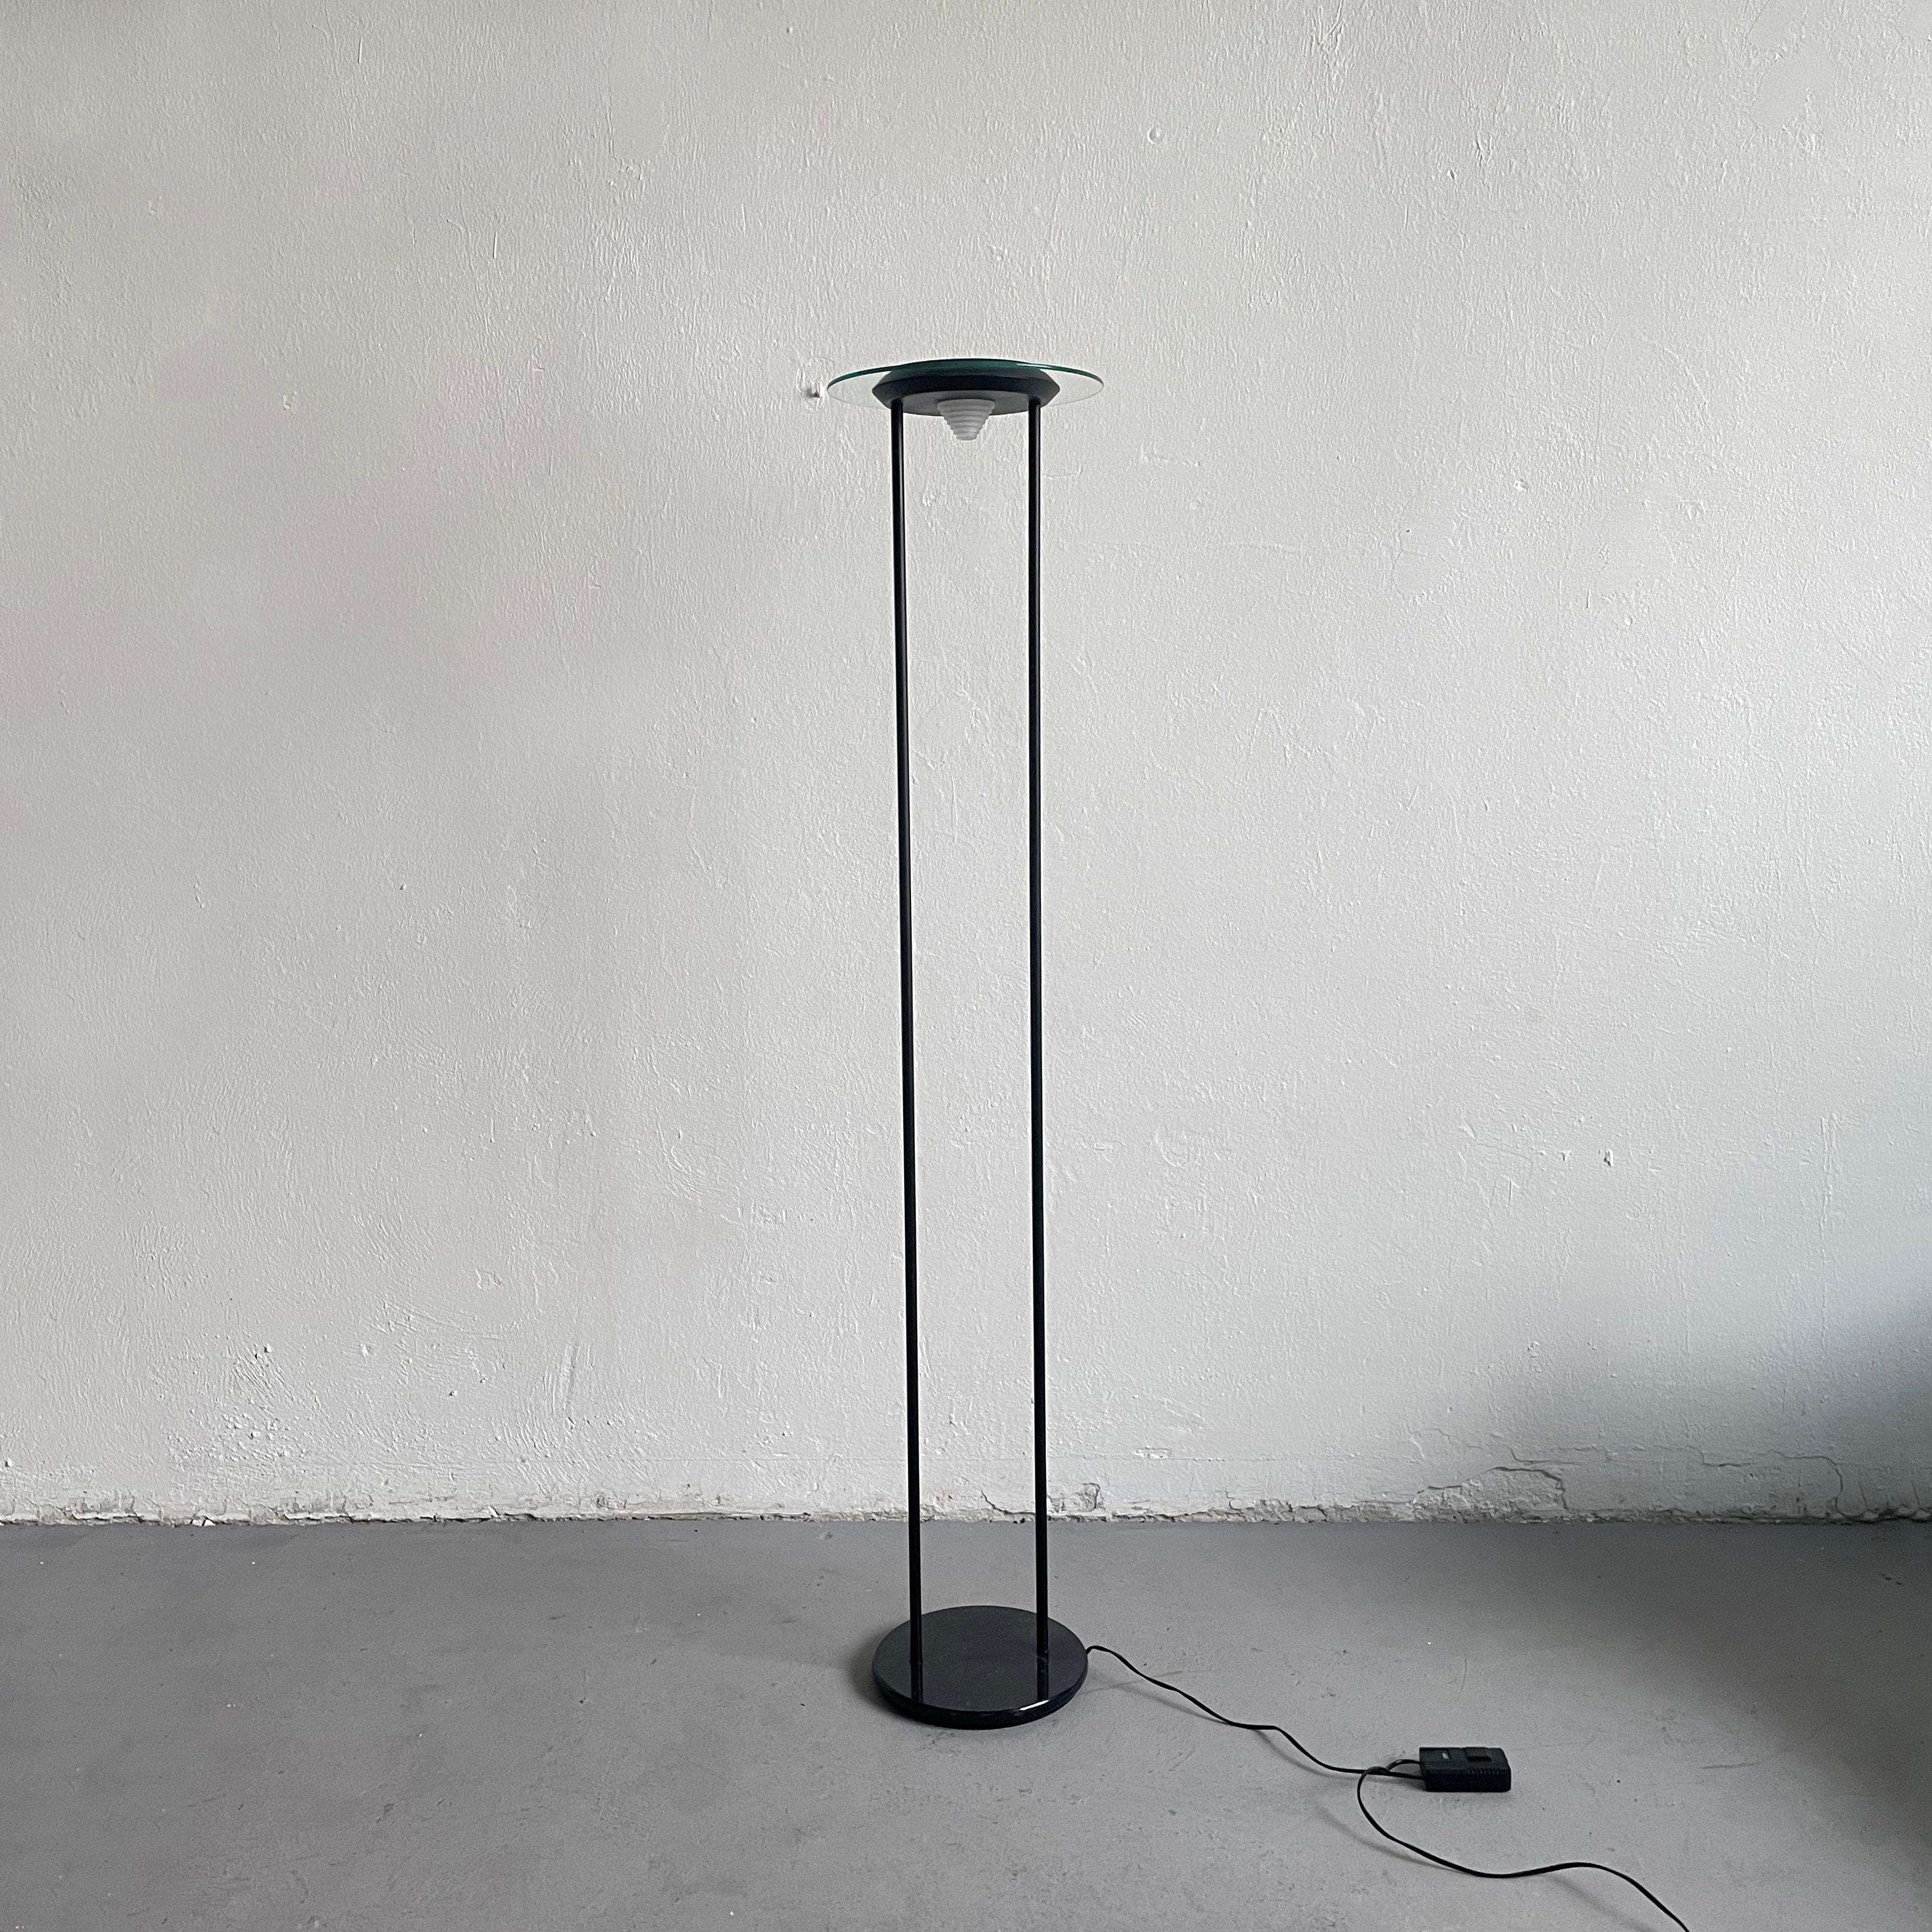 Vintage halogen floor lamp, postmodern design from the 1980s.

Black faux marble base and black lacquered metal structure supports glass and metal UFO shaped lampshade

Unknown manufacturer.

The lamp is in good condition and in a fully